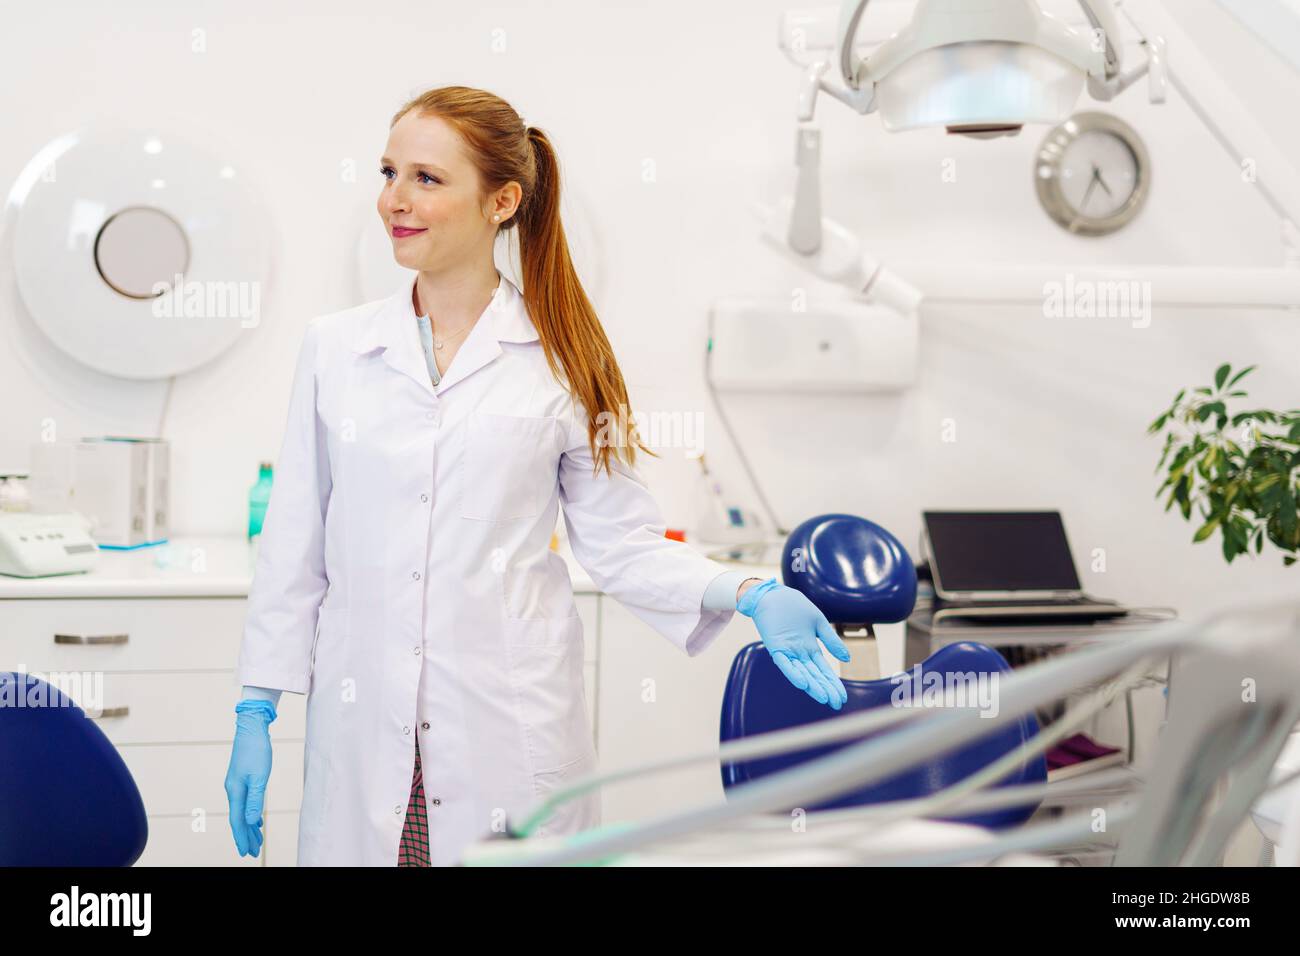 Glad woman in medical uniform with ginger ponytail smiling and showing empty chair while inviting patient to take seat in modern dentist office Stock Photo